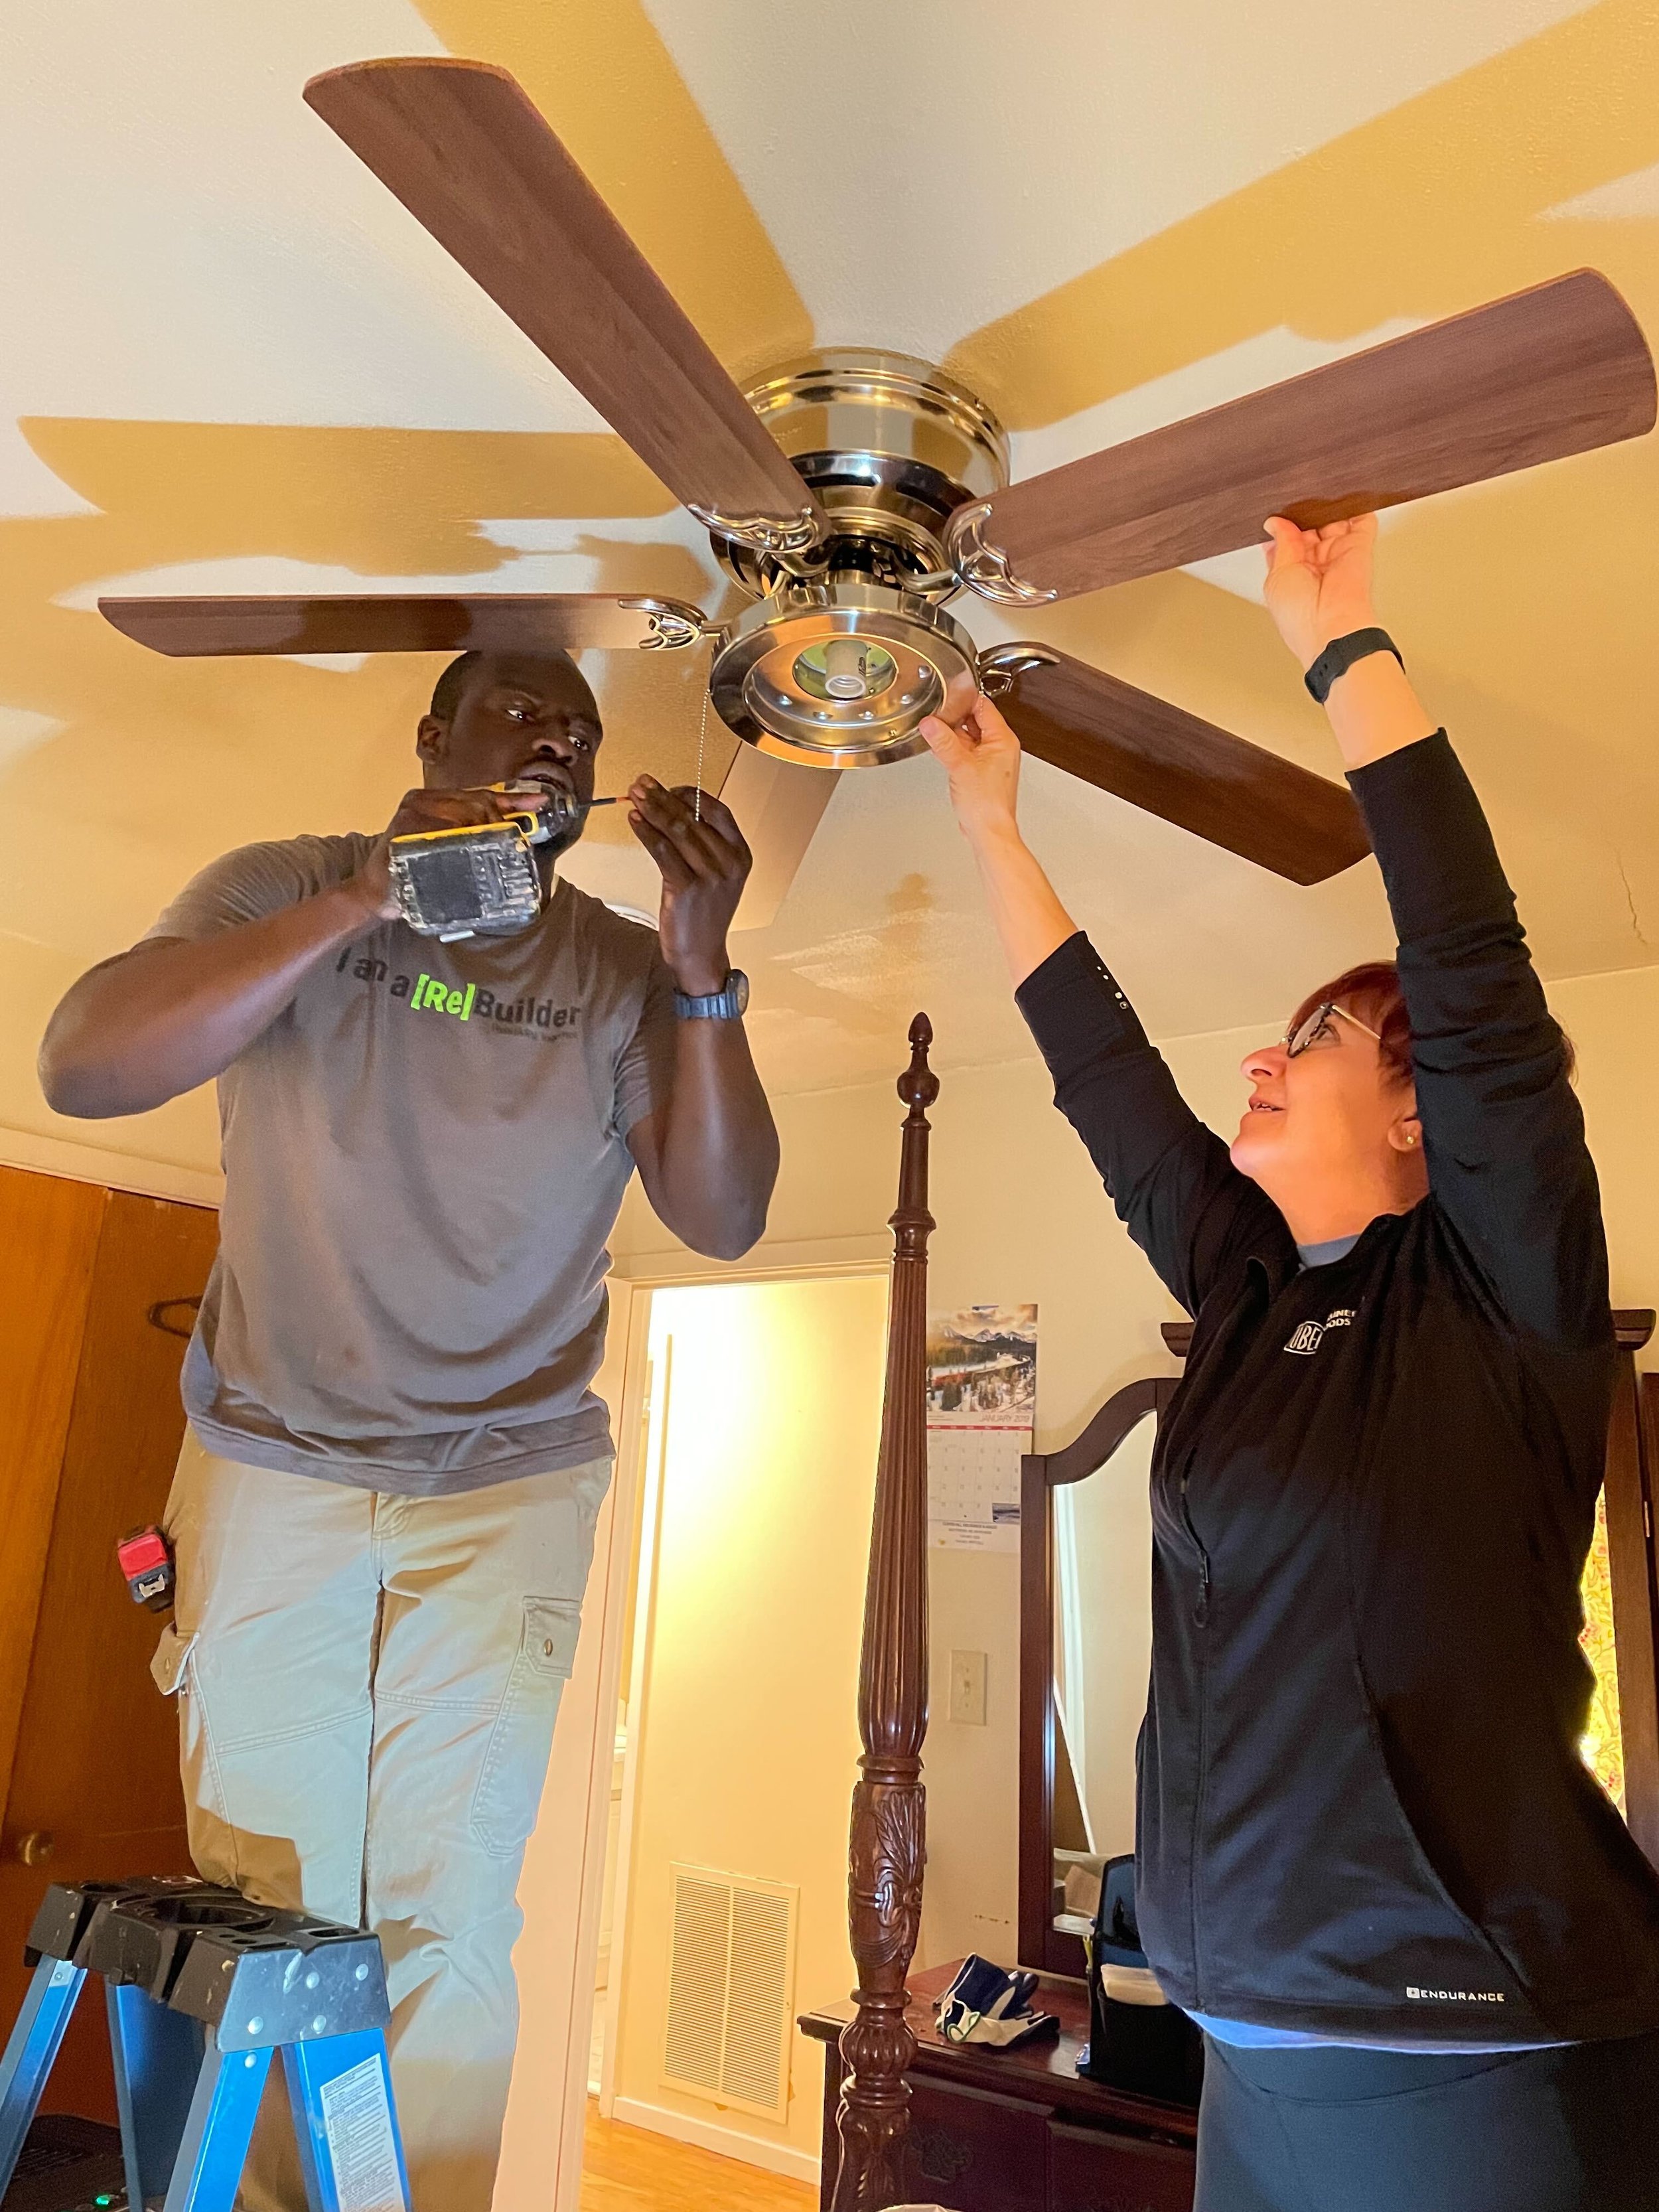 Huber_ceiling fan installation with Mo.jpg